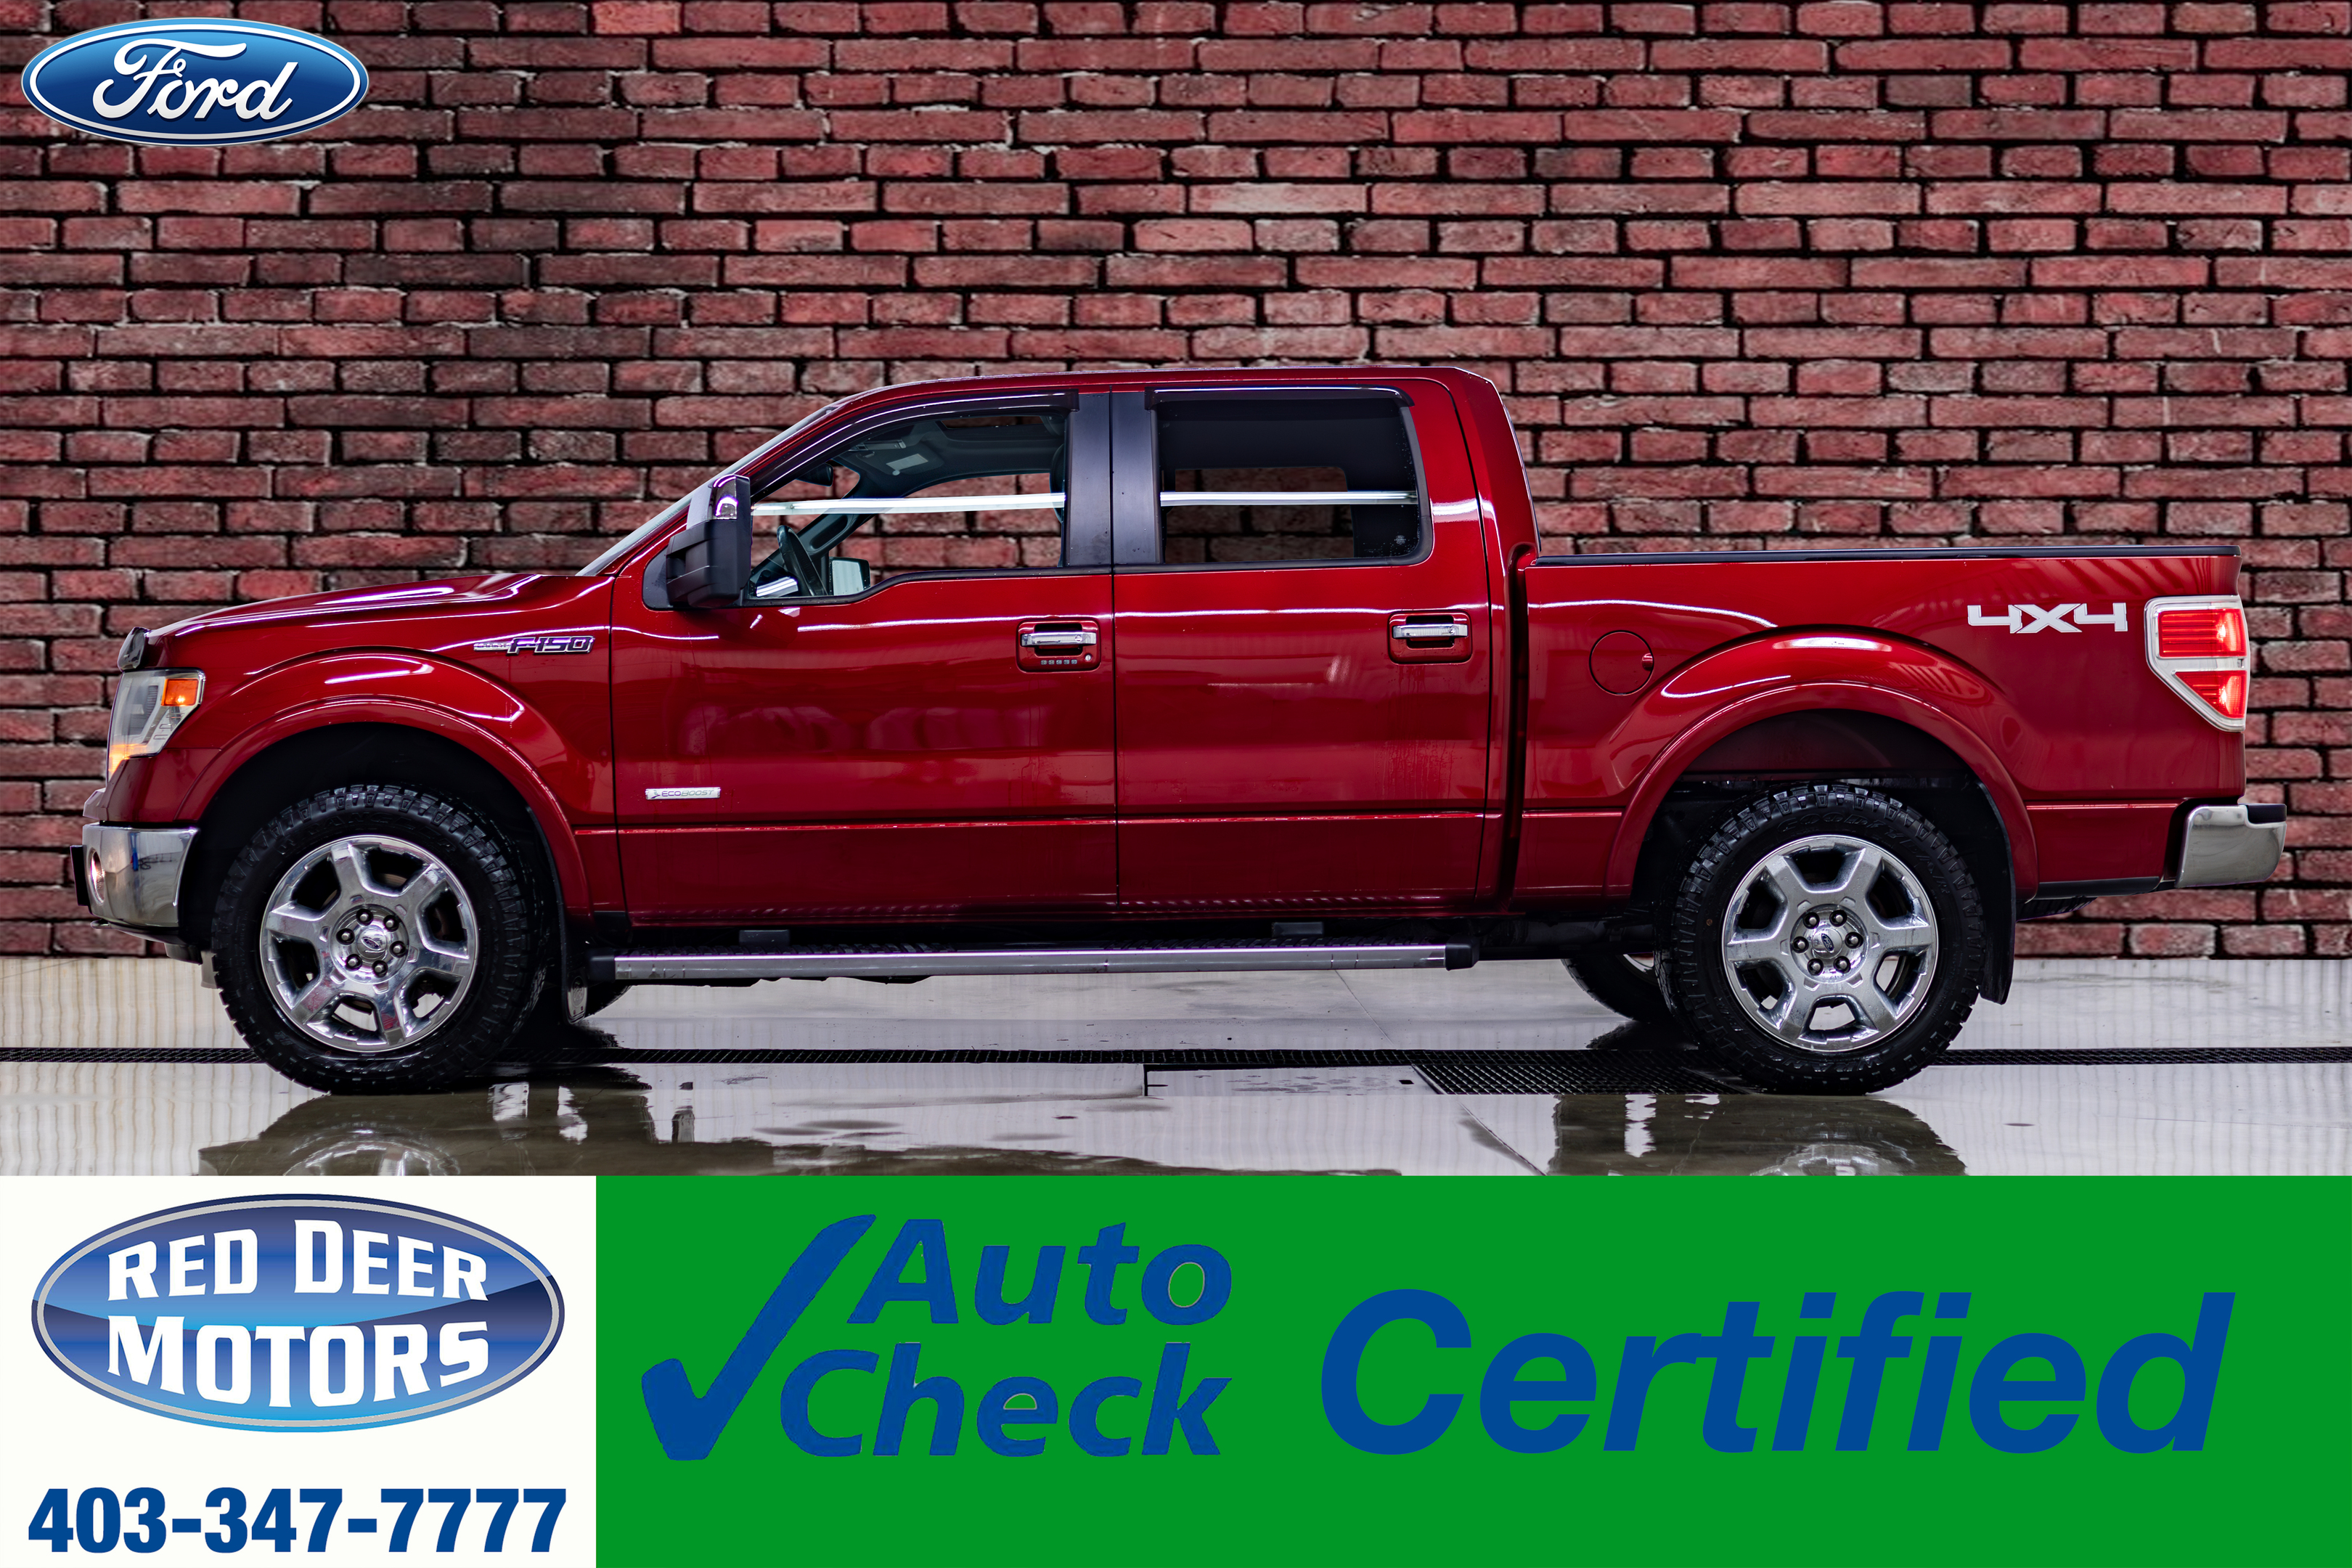 2014 Ford F-150 4x4 Super Crew Lariat Leather Roof Nav